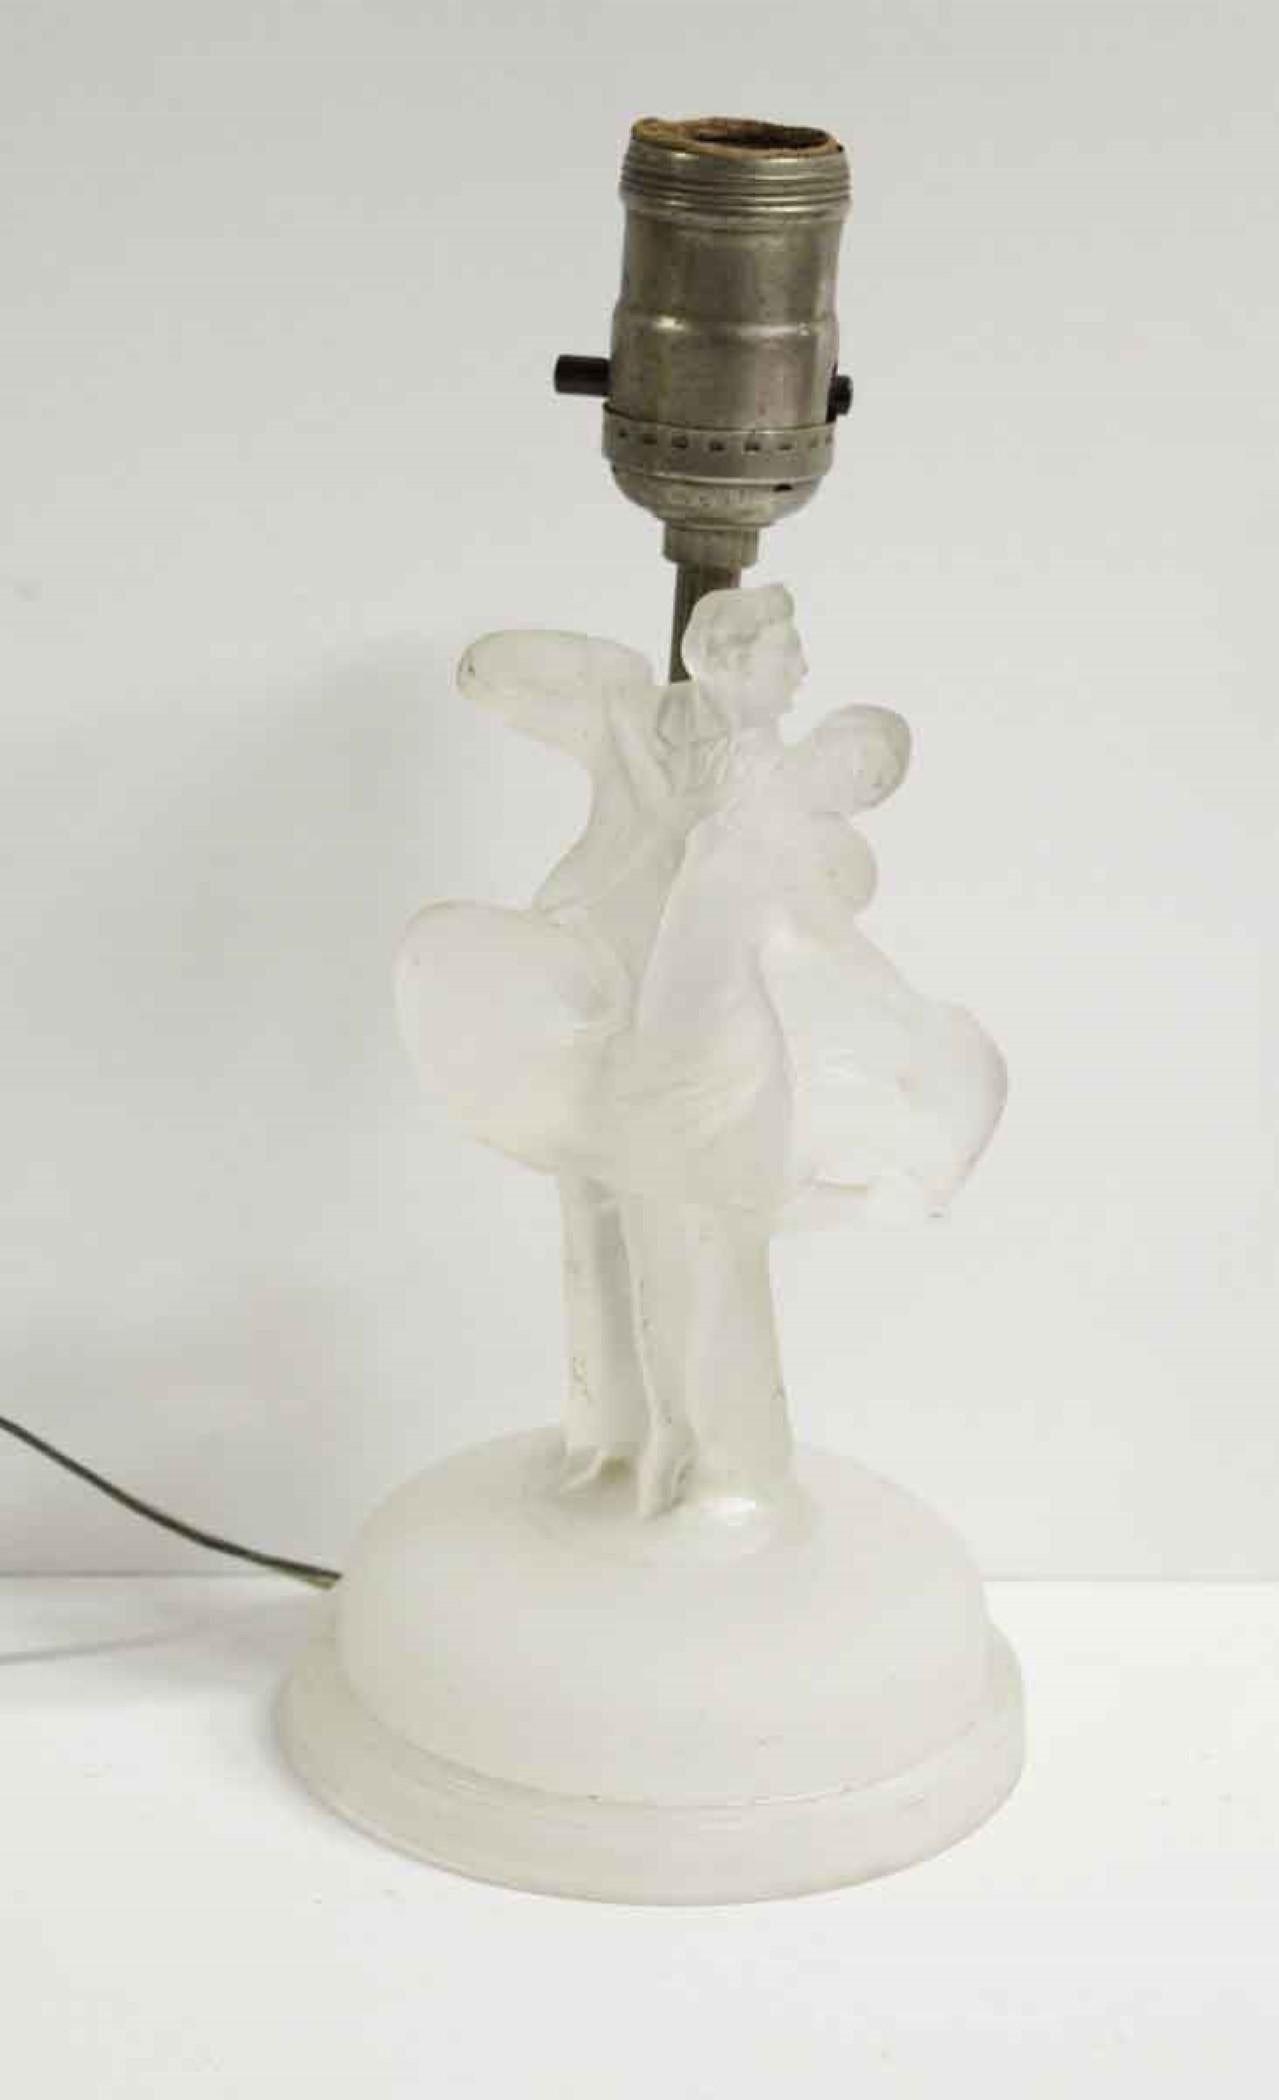 Frosted glass elegant vanity lamps carved into a man and woman dancing. There are minor chips at the base and some dark scratches. Please see the photos. Priced as a pair. Price includes restoration. This can be seen at our 400 Gilligan St location